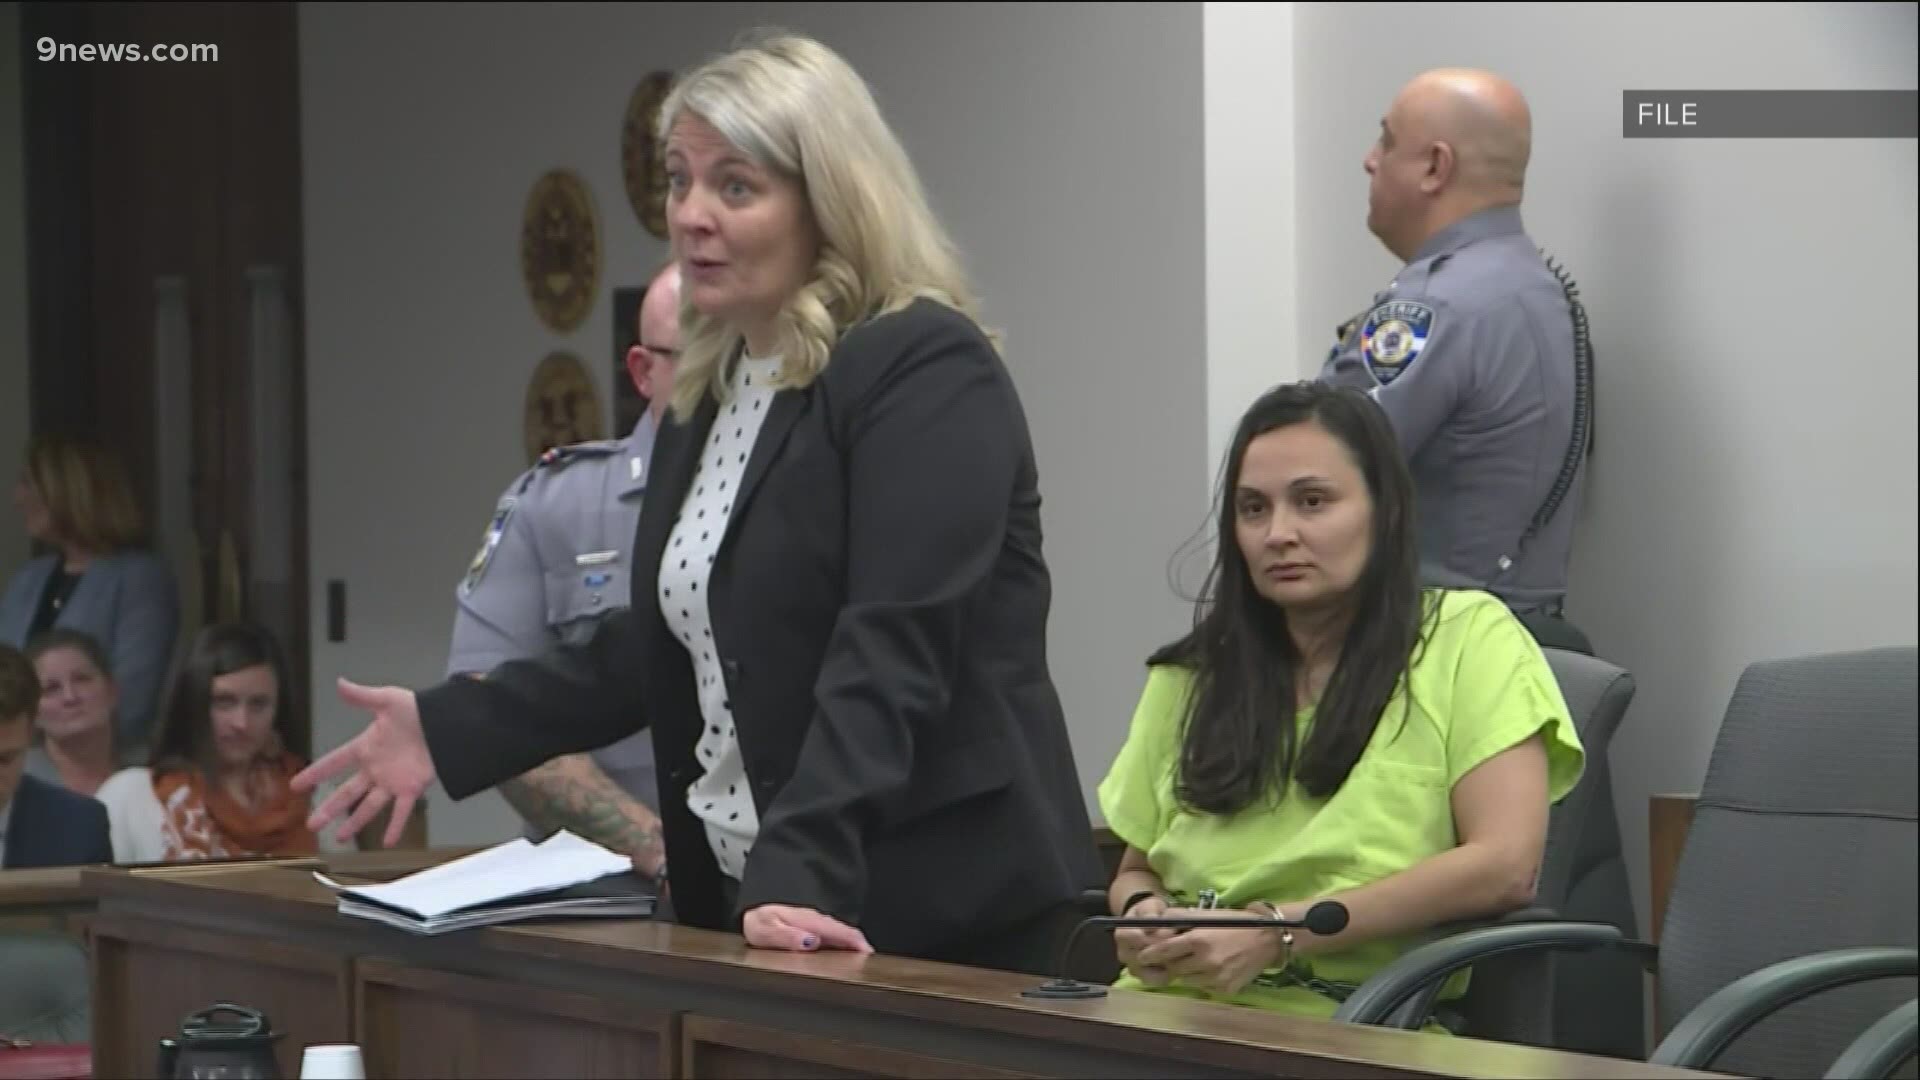 Stauch is accused in the murder of her 11-year-old stepson, who disappeared in January 2020.